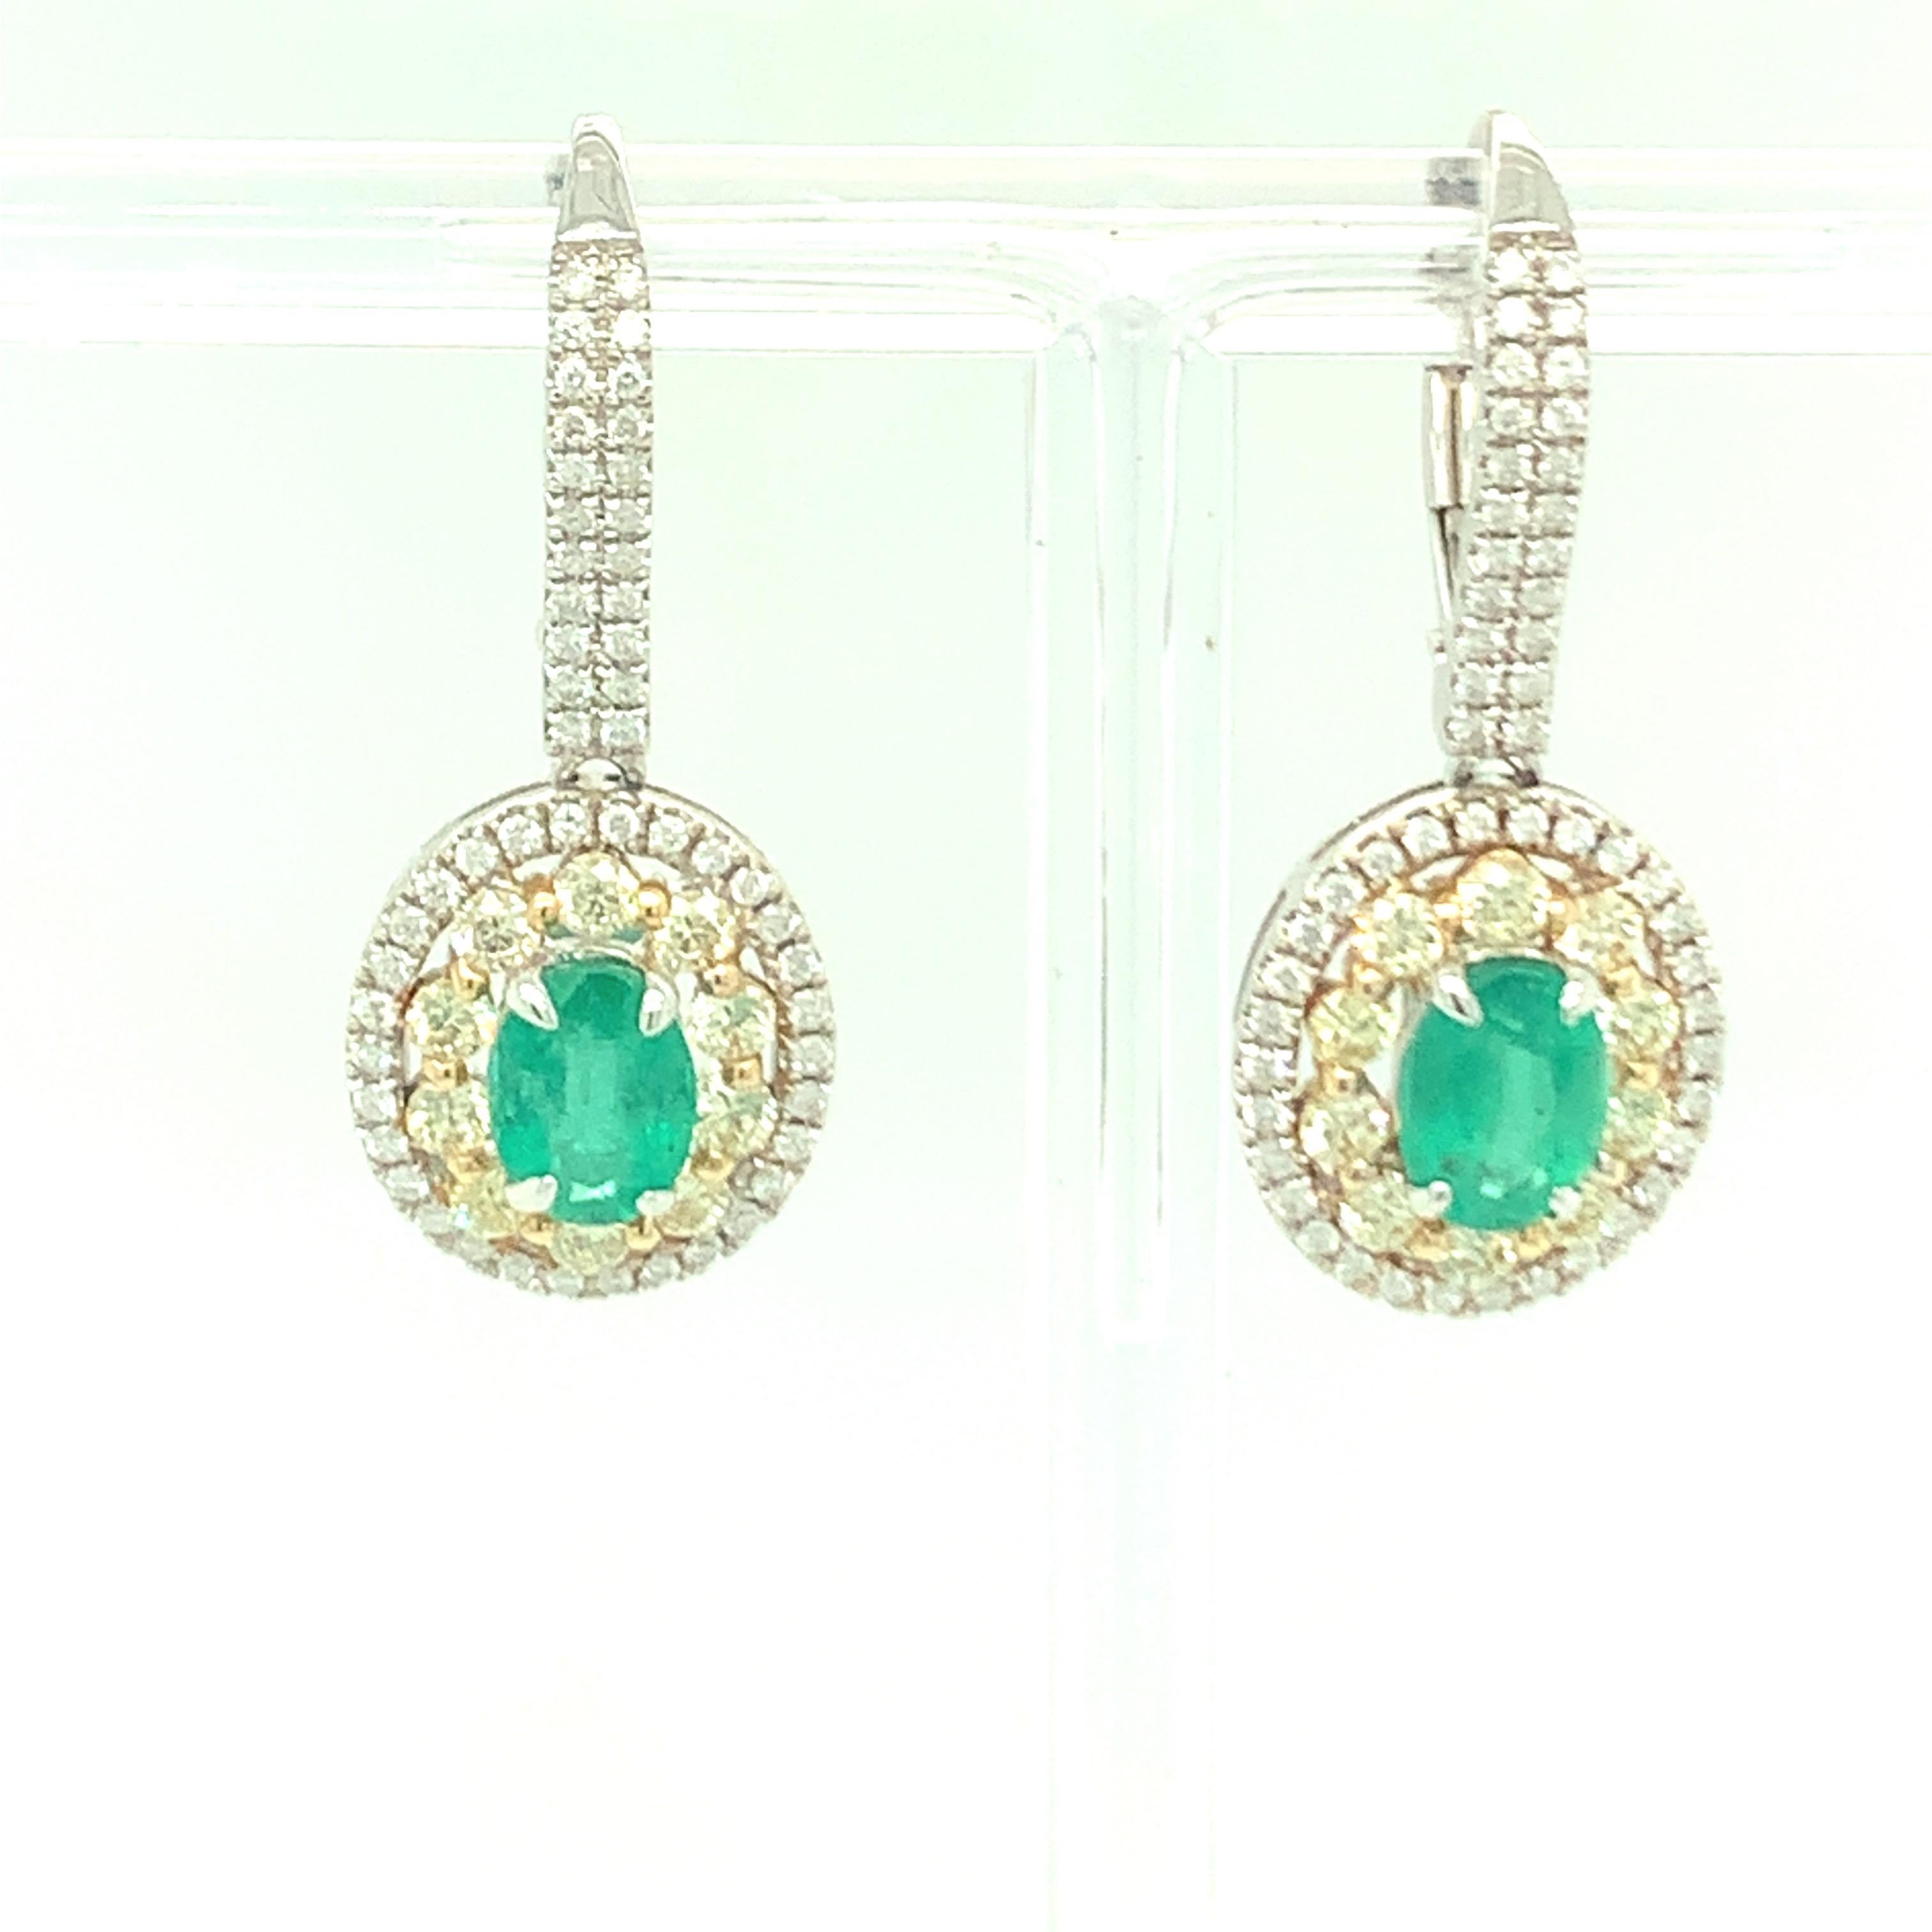 This oval shaped emerald earrings has two rows of diamond halo. Inner row is of yellow diamond and outer row of white diamond with pave setting on front lever. Green emerald marries the combination of yellow and white diamond very well. Finished